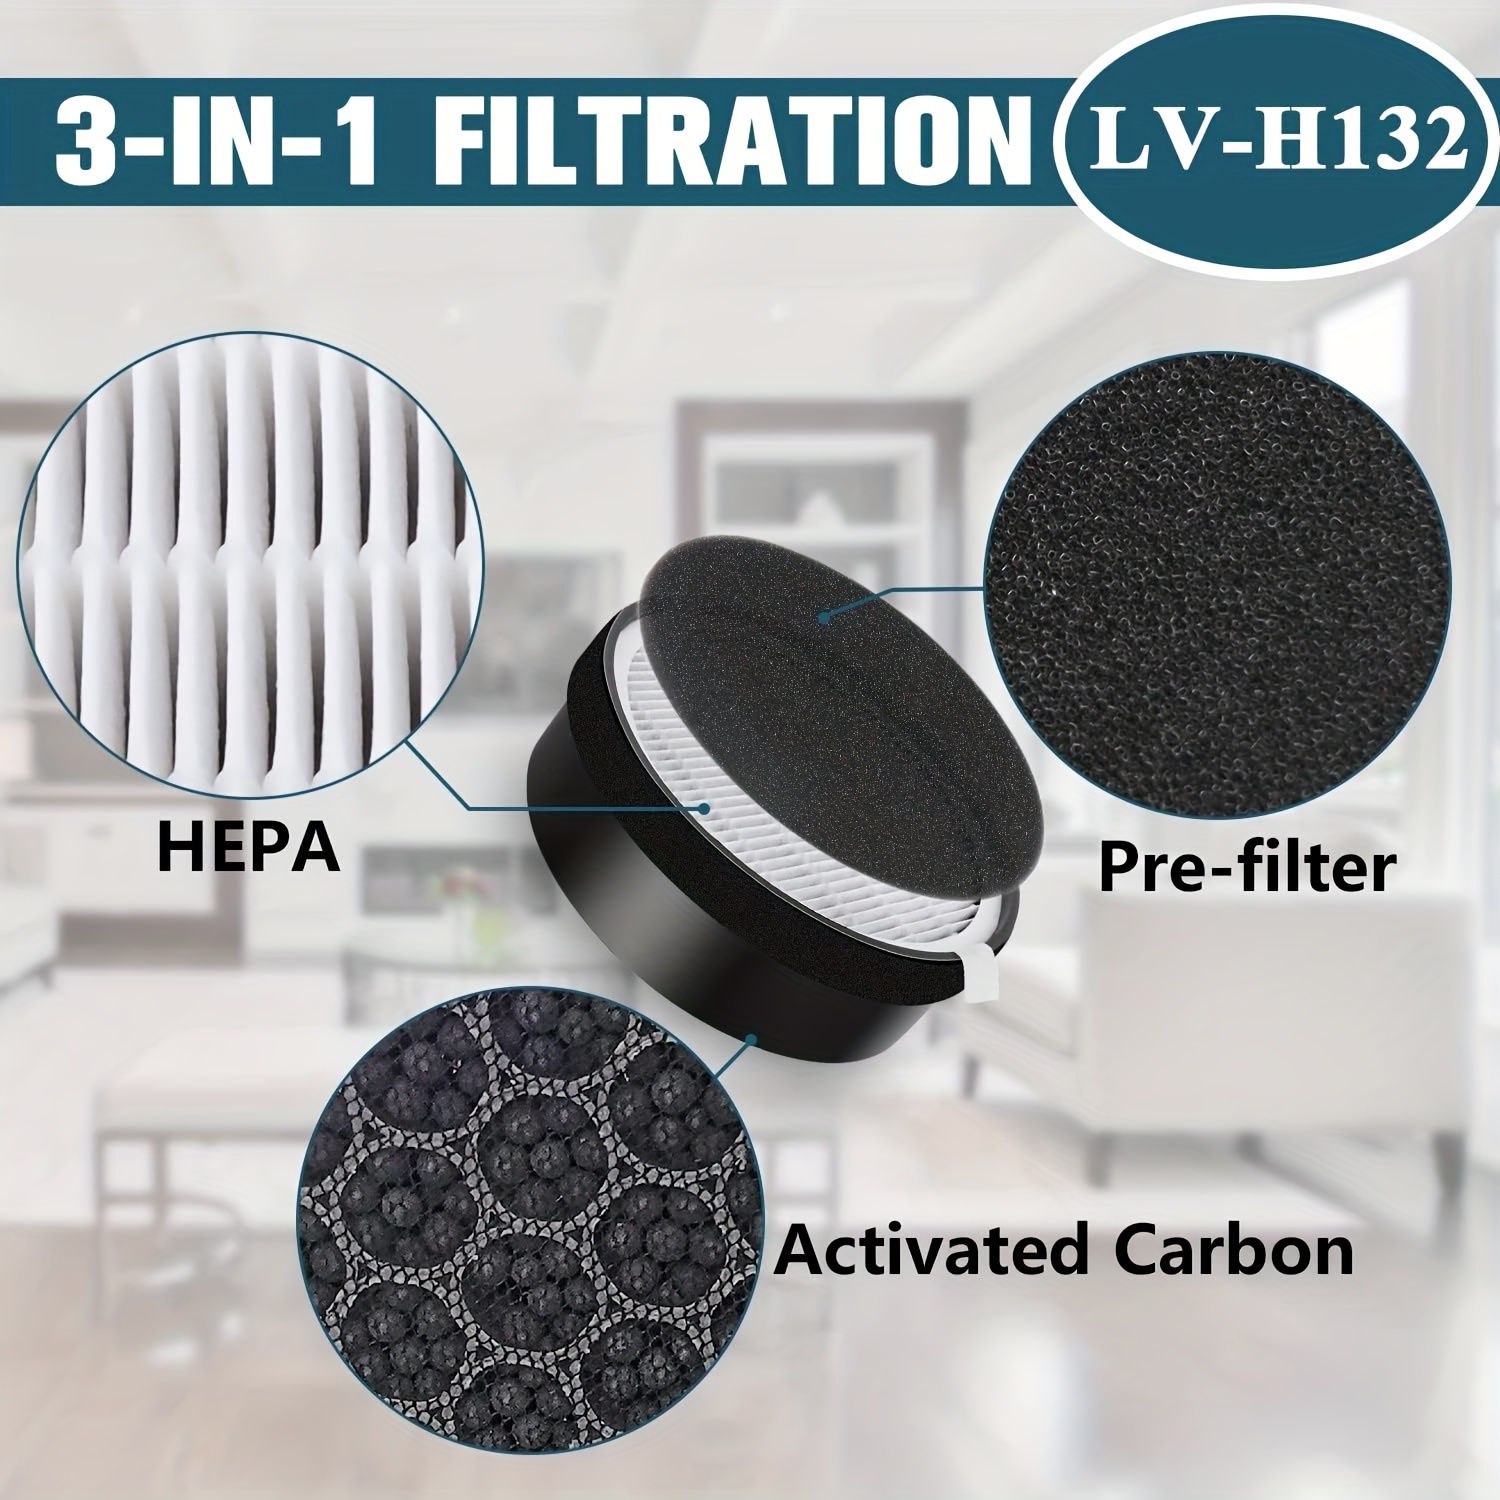 LV-H132 Replacement Filter Compatible for LEVOIT LV-H132 Air Puifier,  3-in-1 Pre, H13 True HEPA, Activated Carbon Filtration System, Replace Part